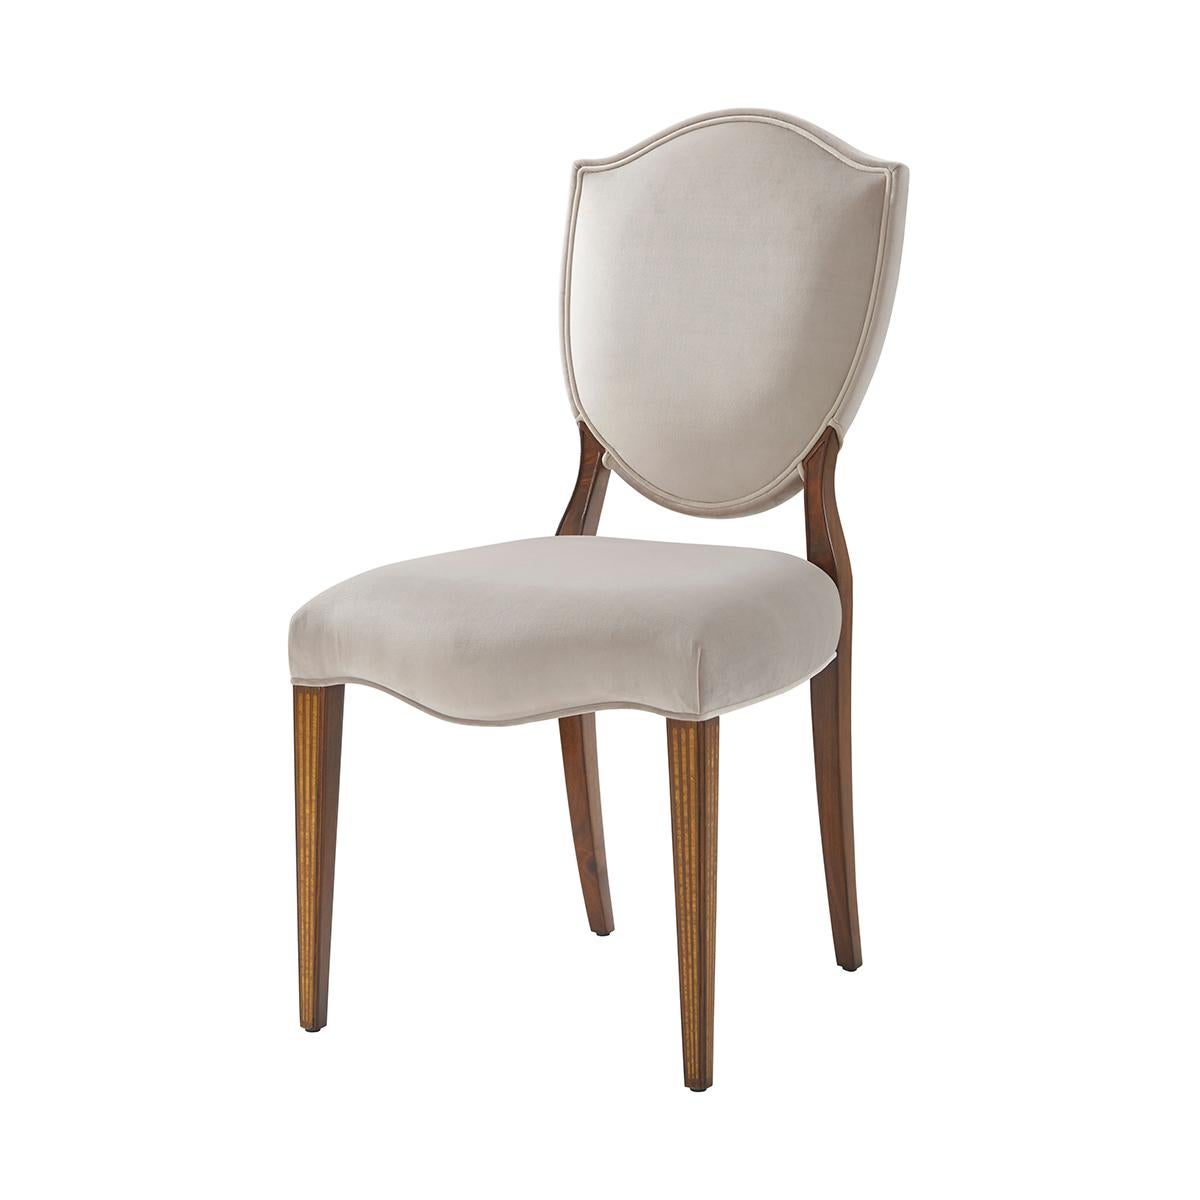 Two George III Hepplewhite style shield back side chairs, with an upholstered back with flame mahogany Veneered Back Supports, the upholstered seat on square tapering legs with satinwood faux fluted inlay.
Dimensions: 19